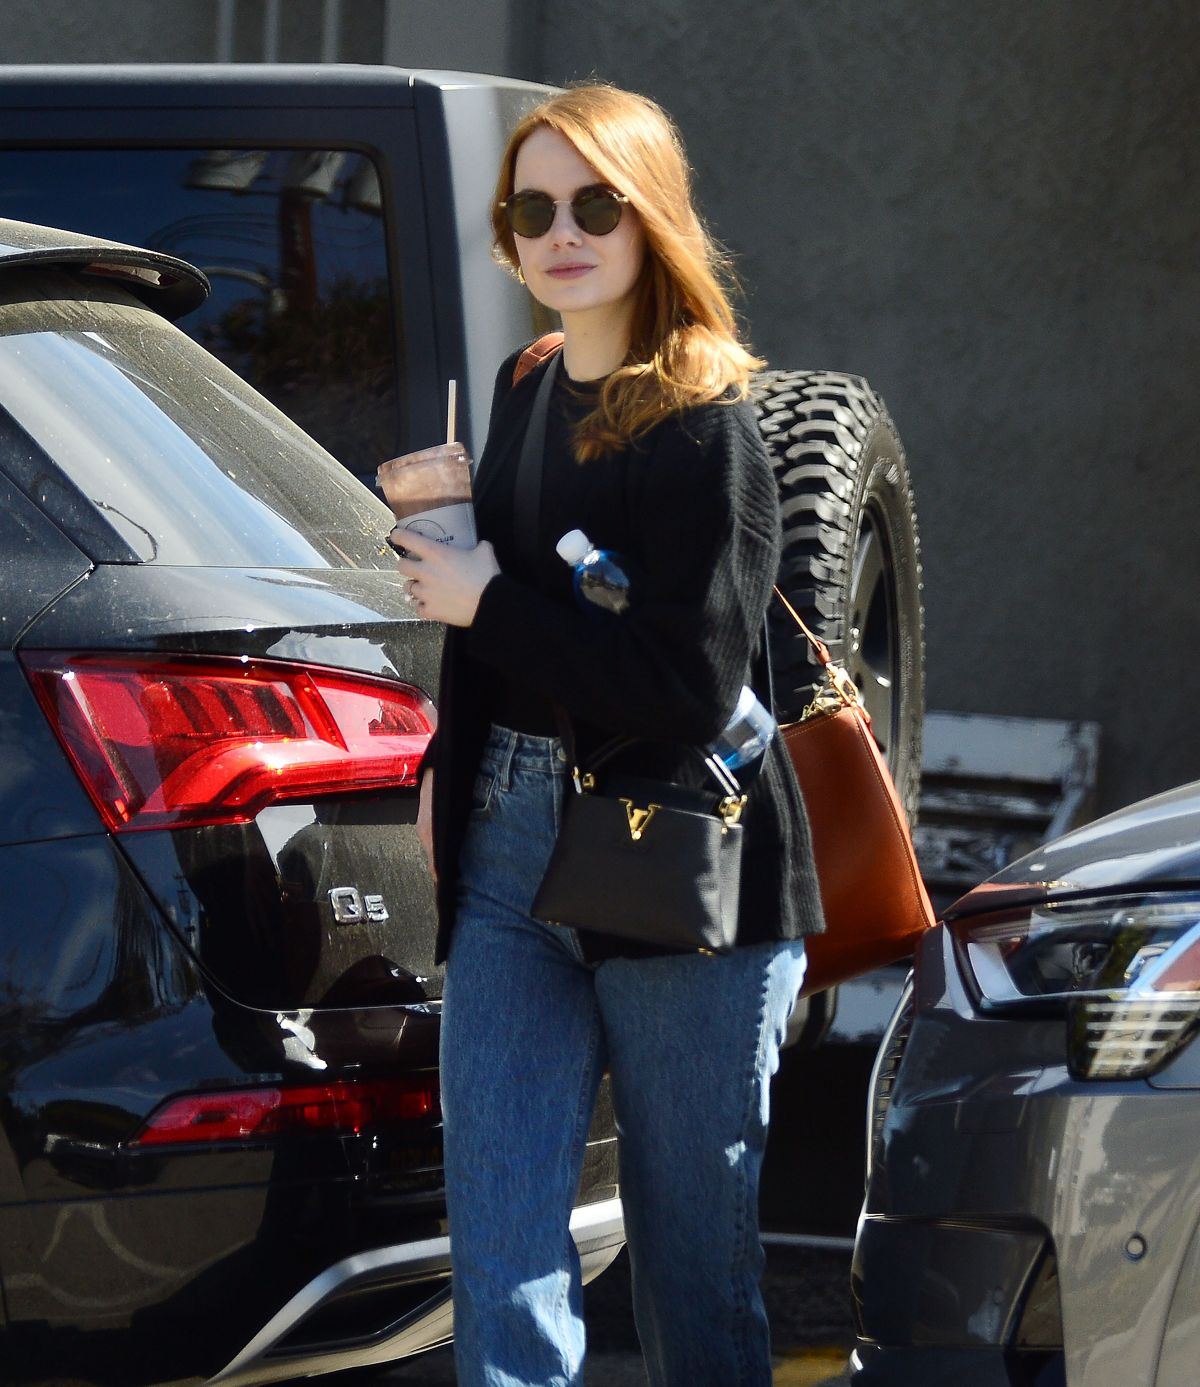 EMMA STONE at a Gym in Los Angeles 03/09/2020 – HawtCelebs